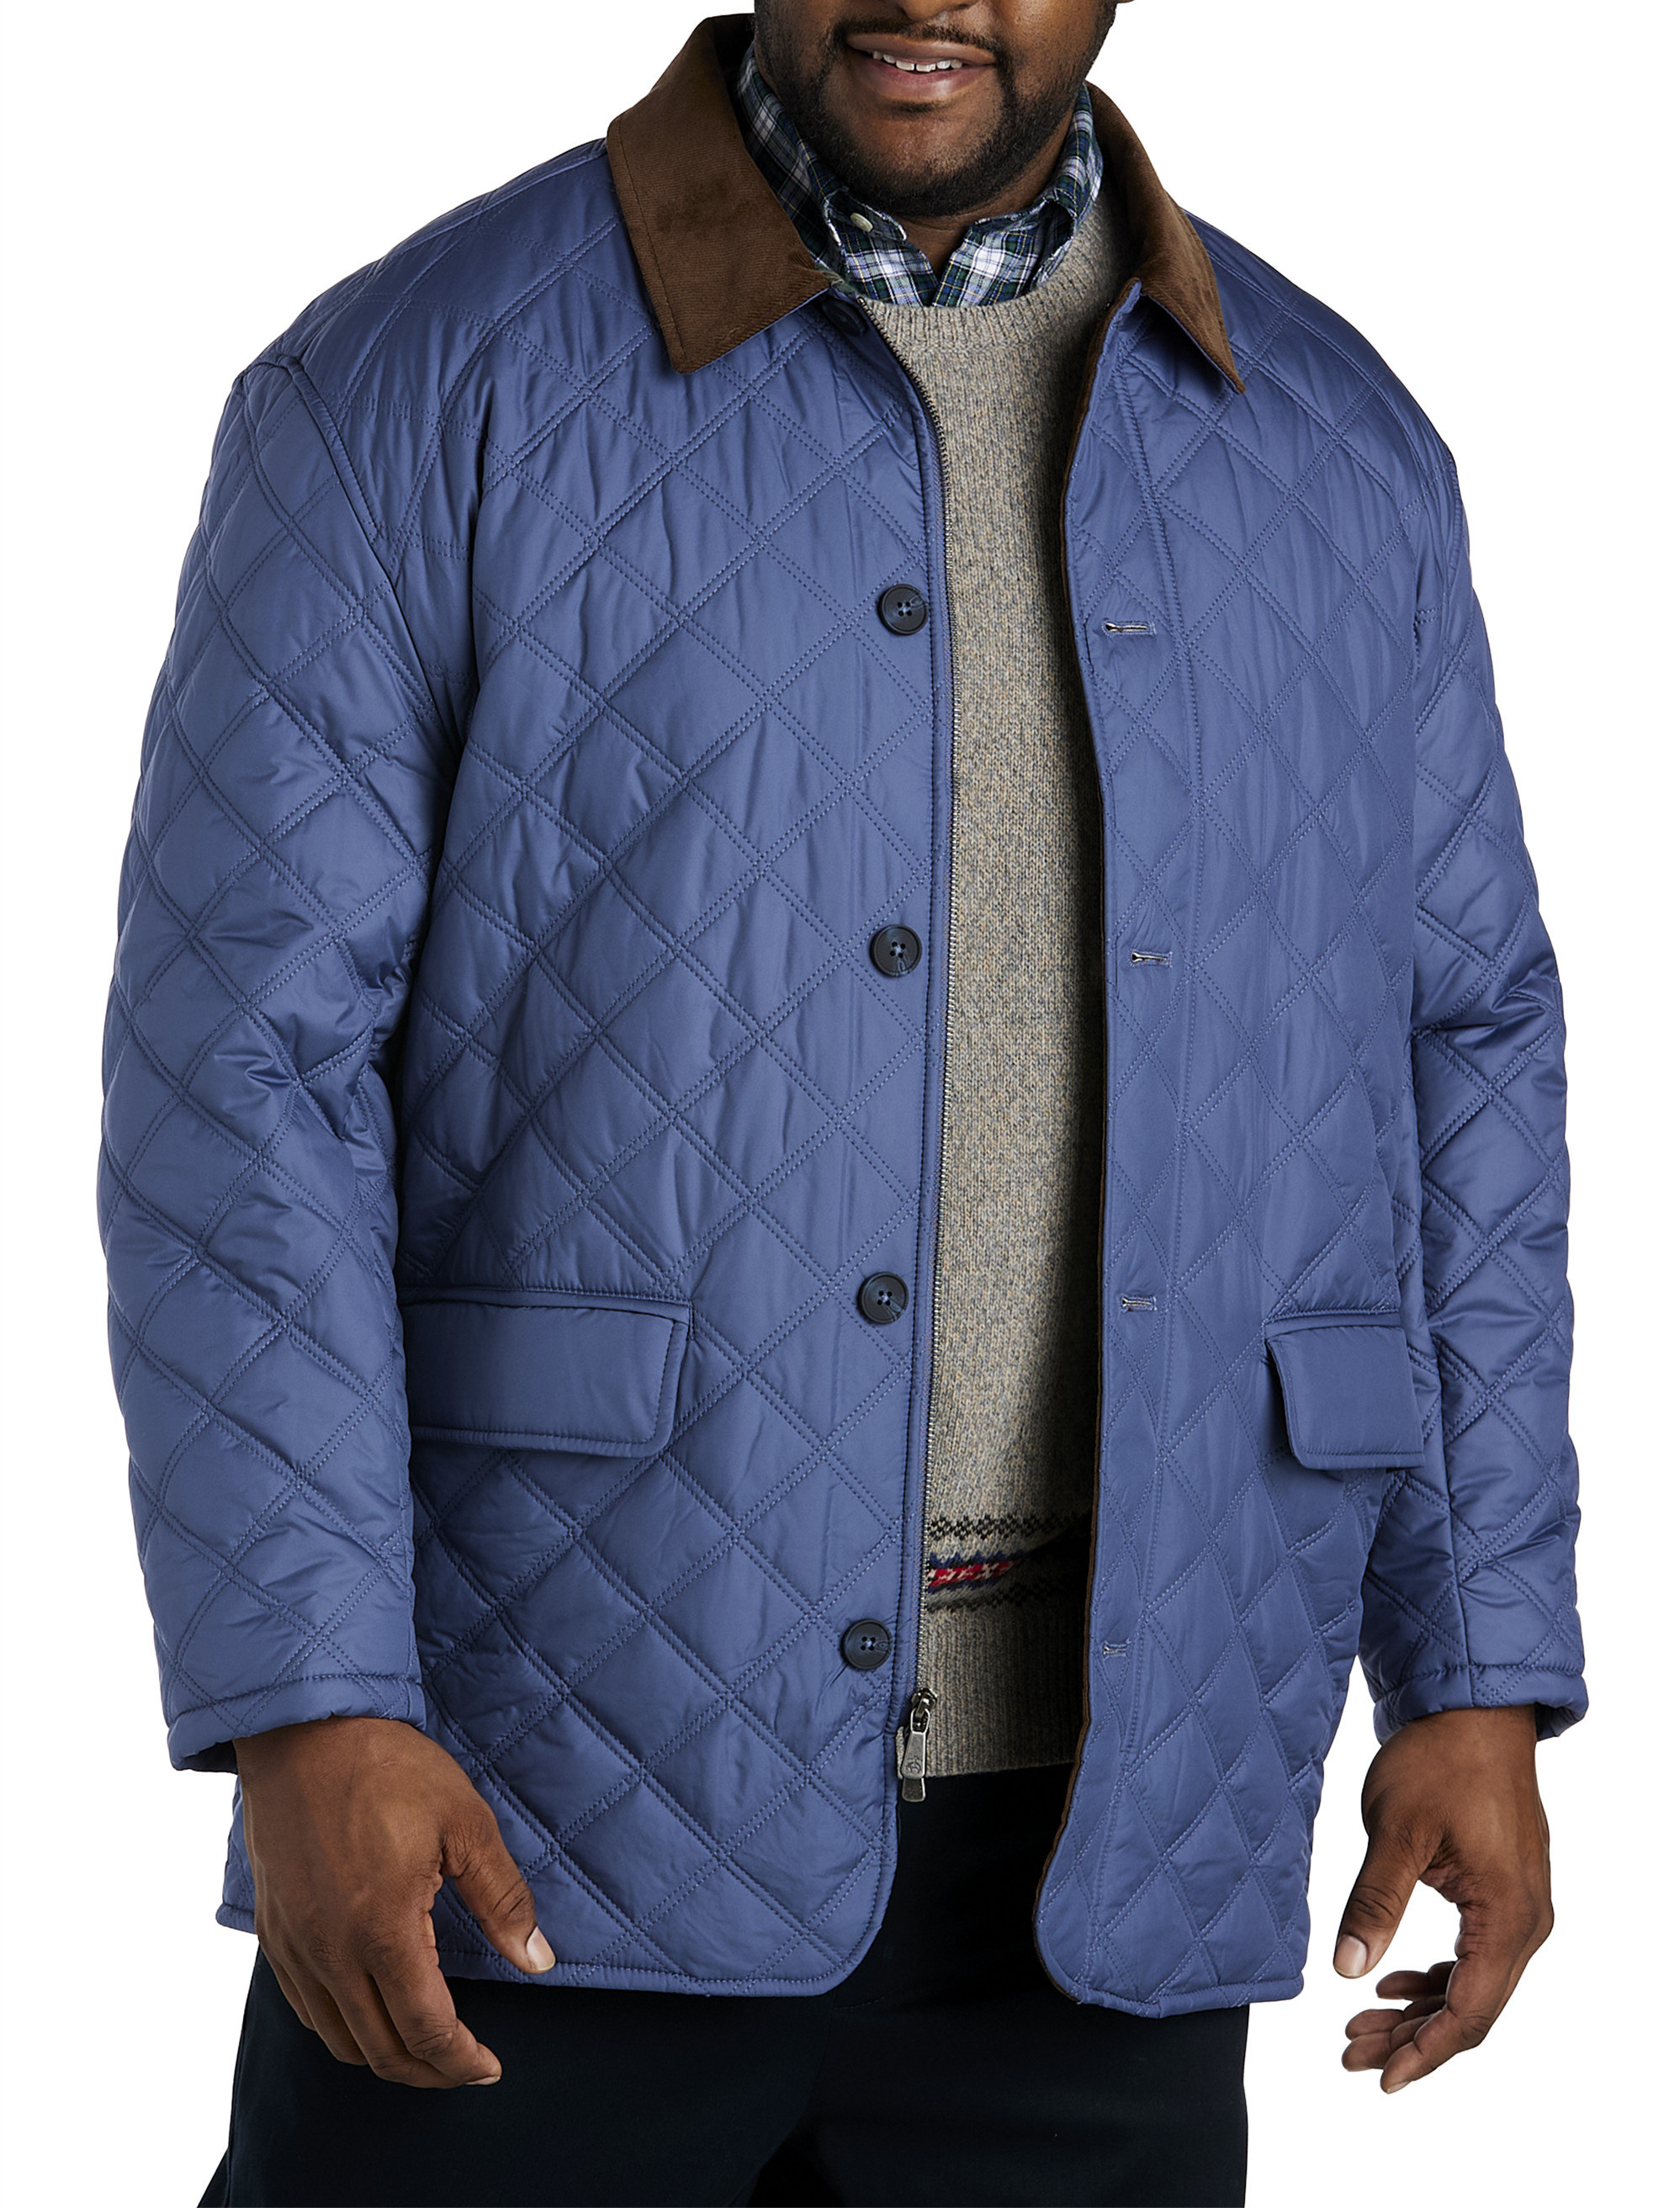 Big And Tall Winter Jackets, Plus Size Coats